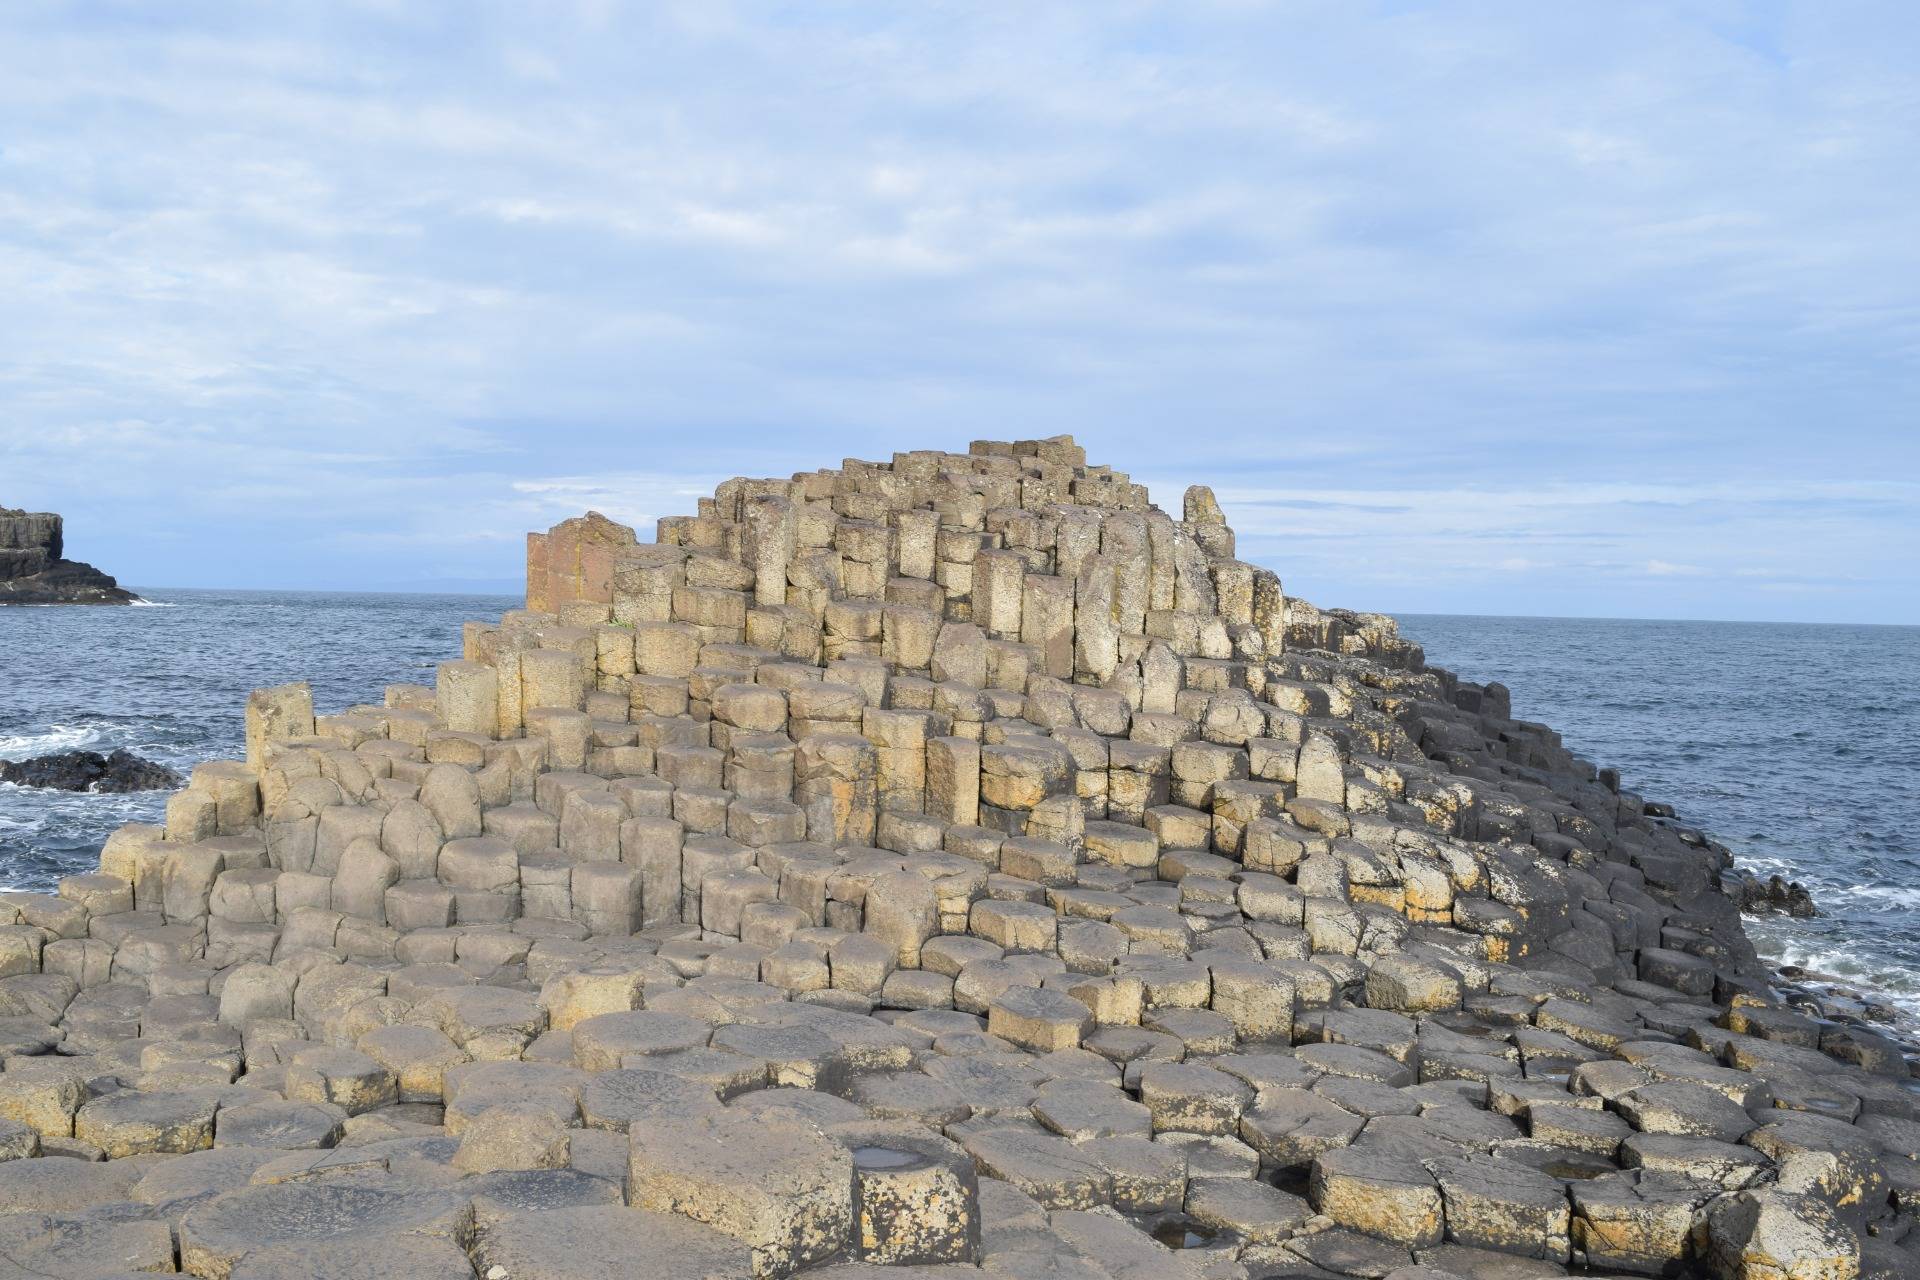 Giants Causeway - impressive array of rocks caused by volcanic eruption - Northern Ireland